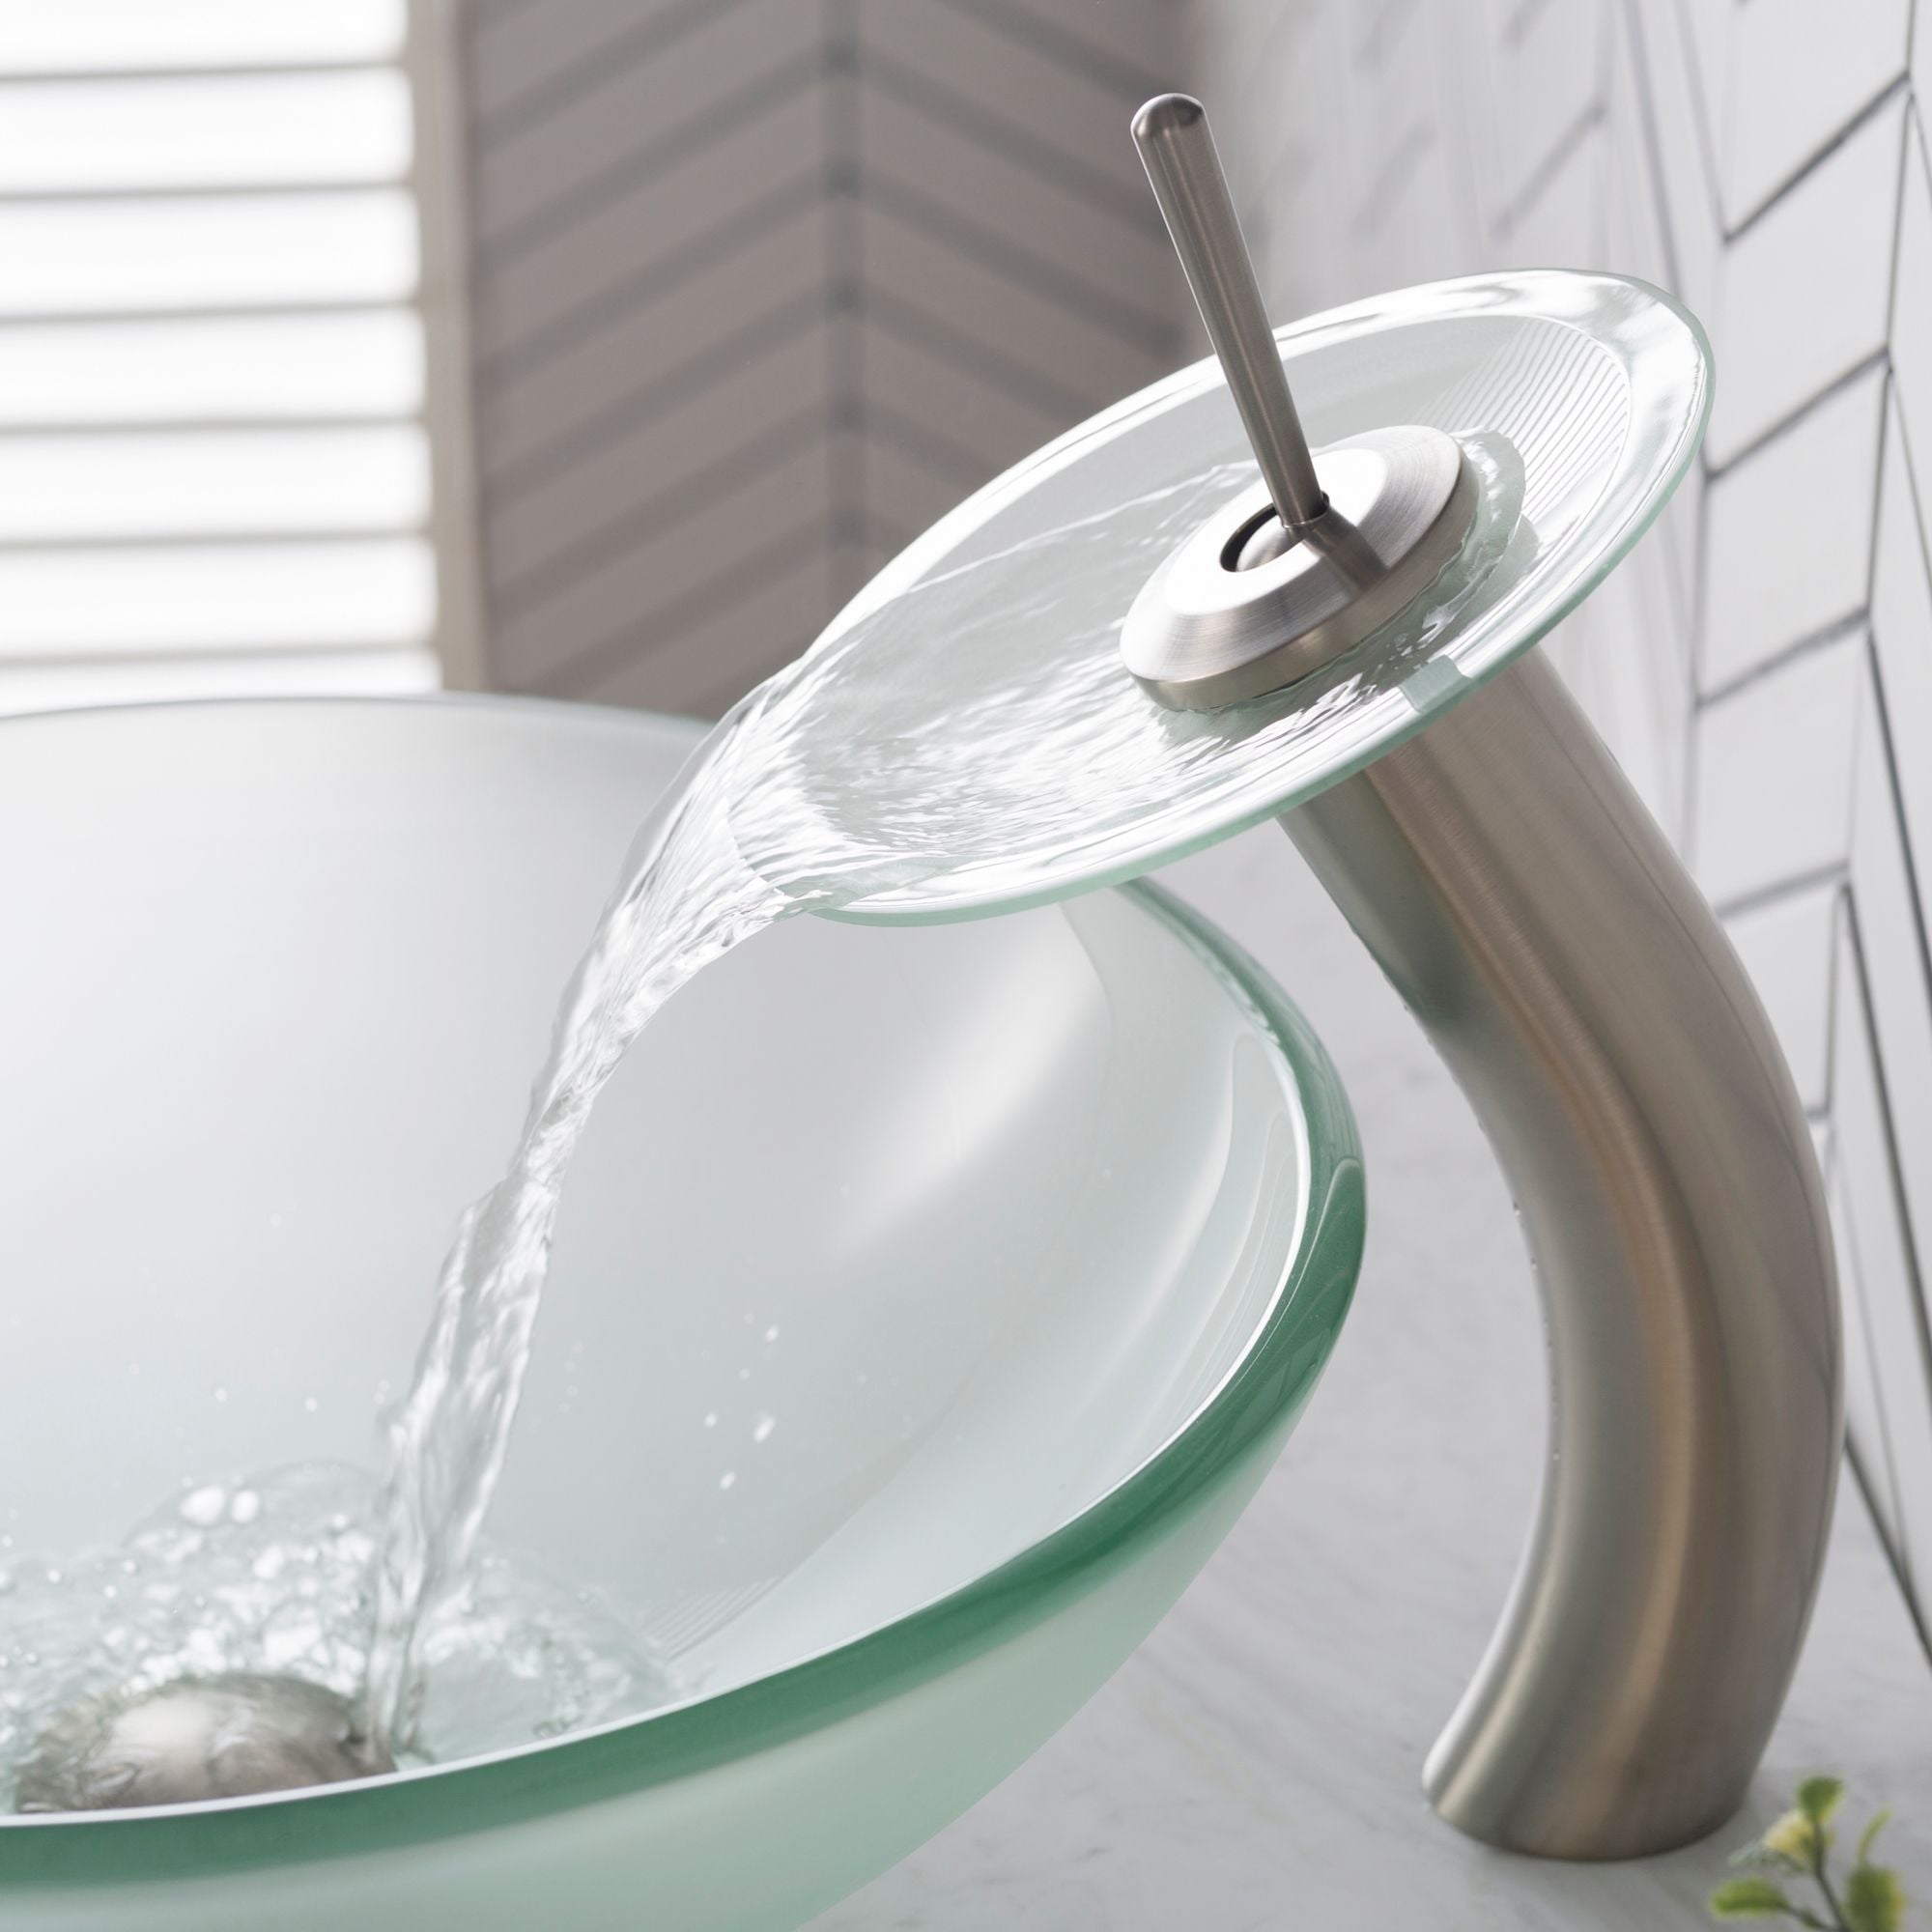 KRAUS Single Lever Waterfall Vessel Faucet with Glass Disk in Satin Nickel and Frosted KGW-1700SN-FR | DirectSinks